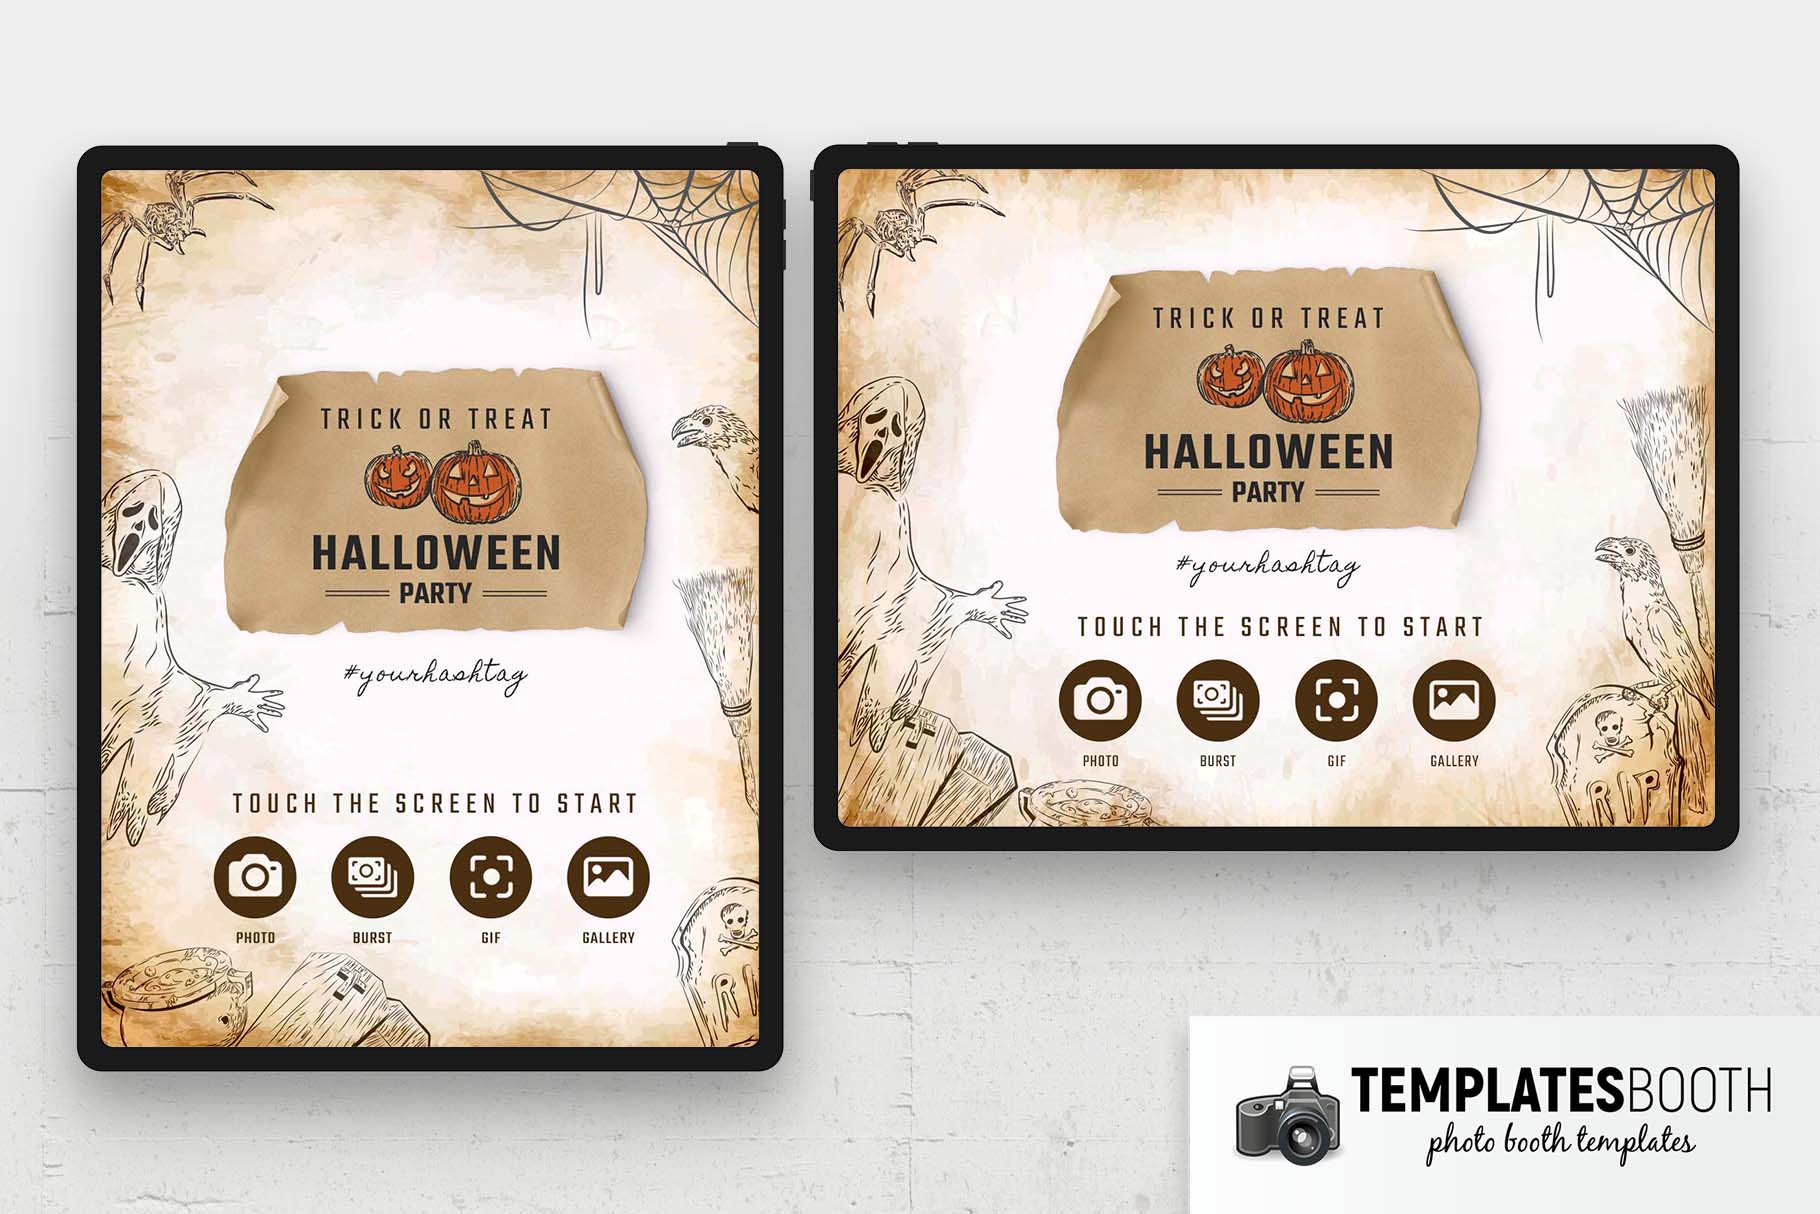 Worn Paper Halloween Photo Booth Welcome Screen